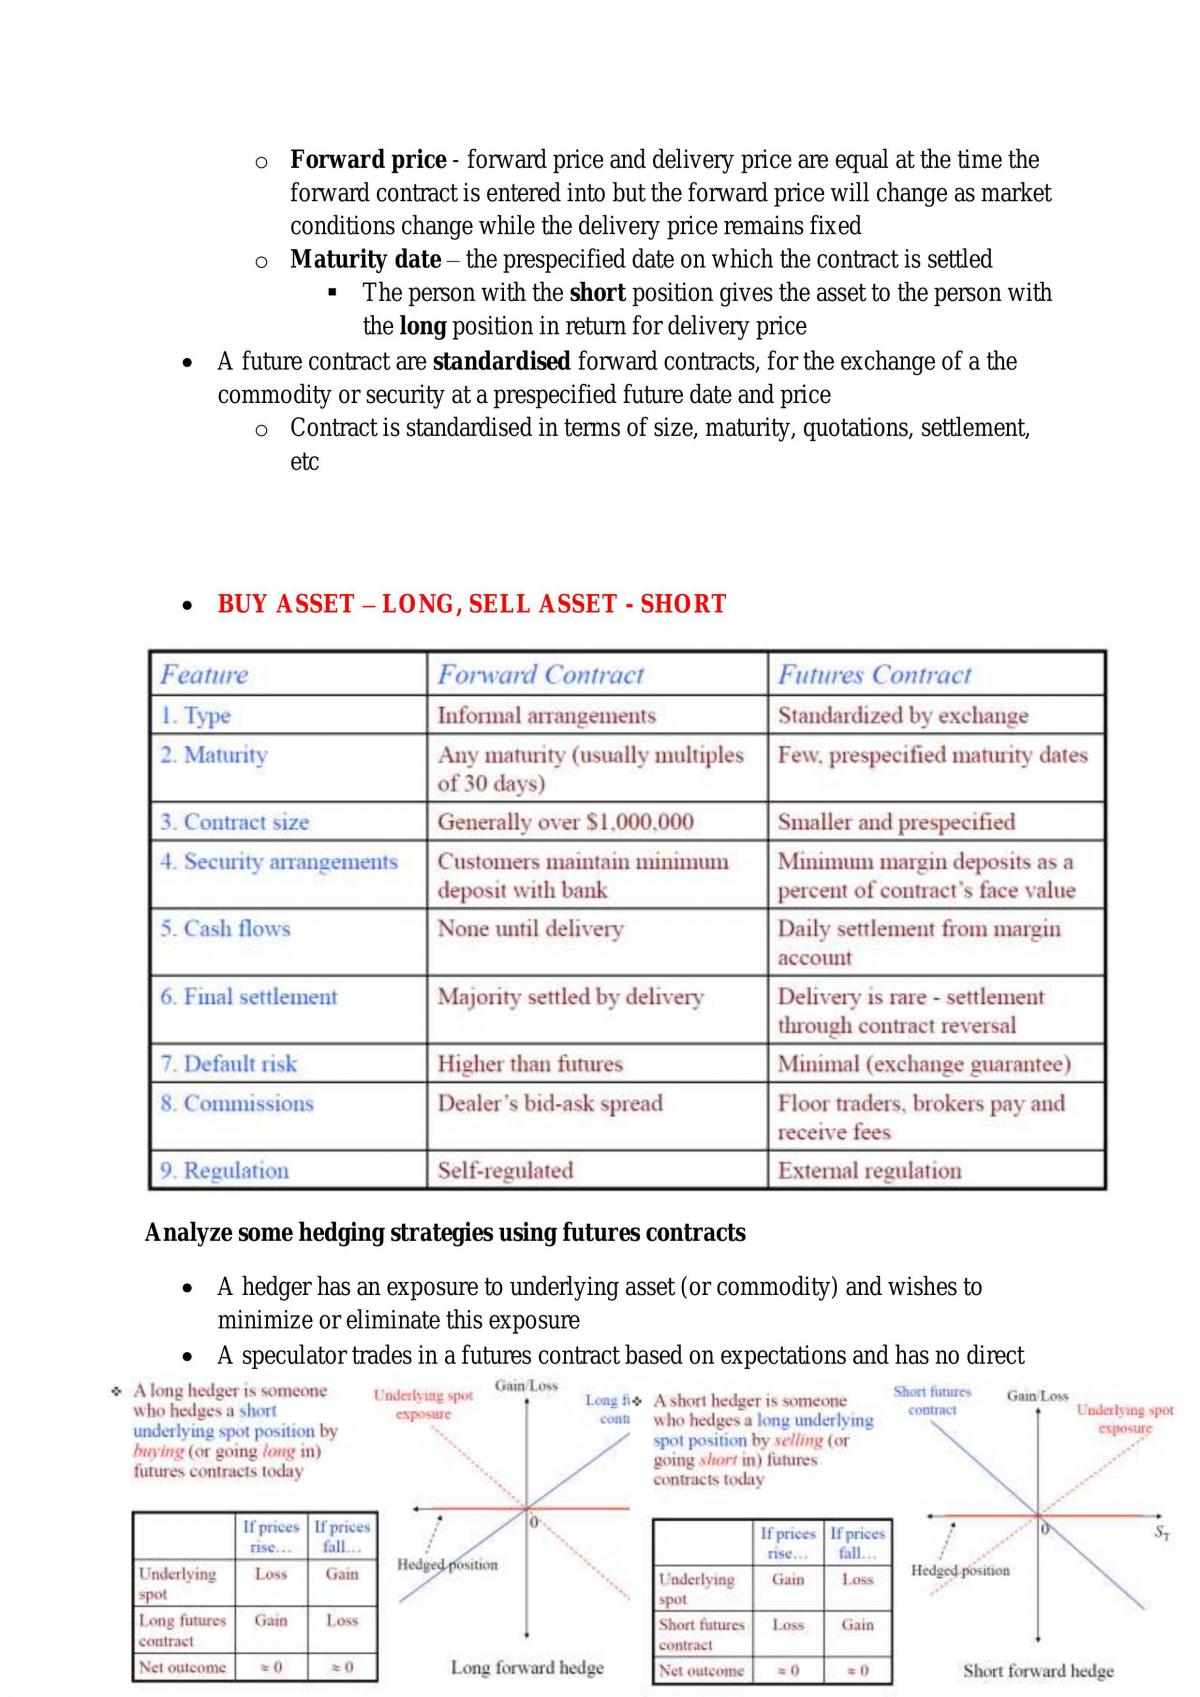 Business Exam - Study Notes - Page 15